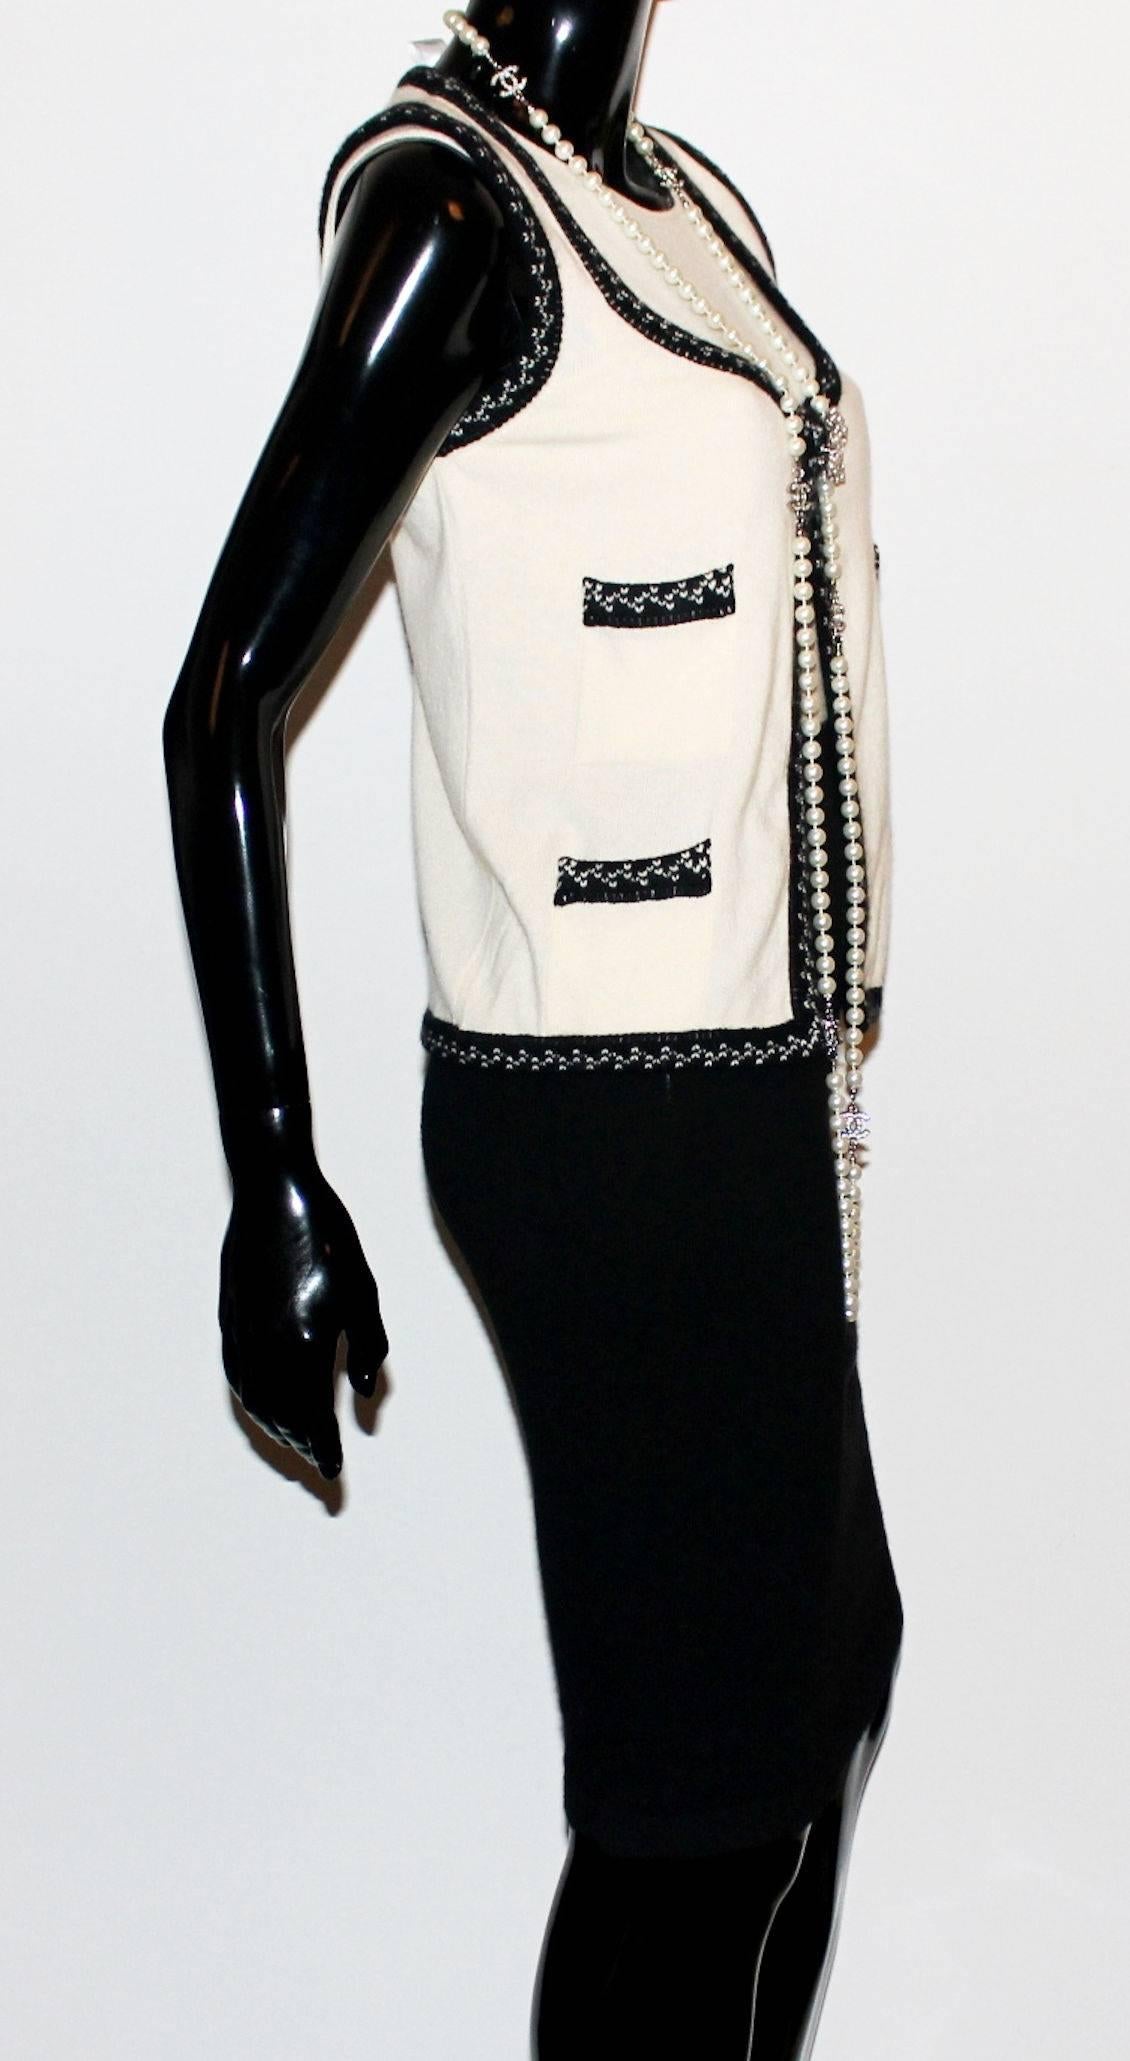 Black and Ivory Chanel Cashmere Dress Set
Consisting of two pieces, dress and gilet
Bodyhugging dress 
Simply slips on
Matching gilet vest
Closes in front with hidden push button
Amazing crochet trimming
Front pockets
CHANEL logo plate on front
100%